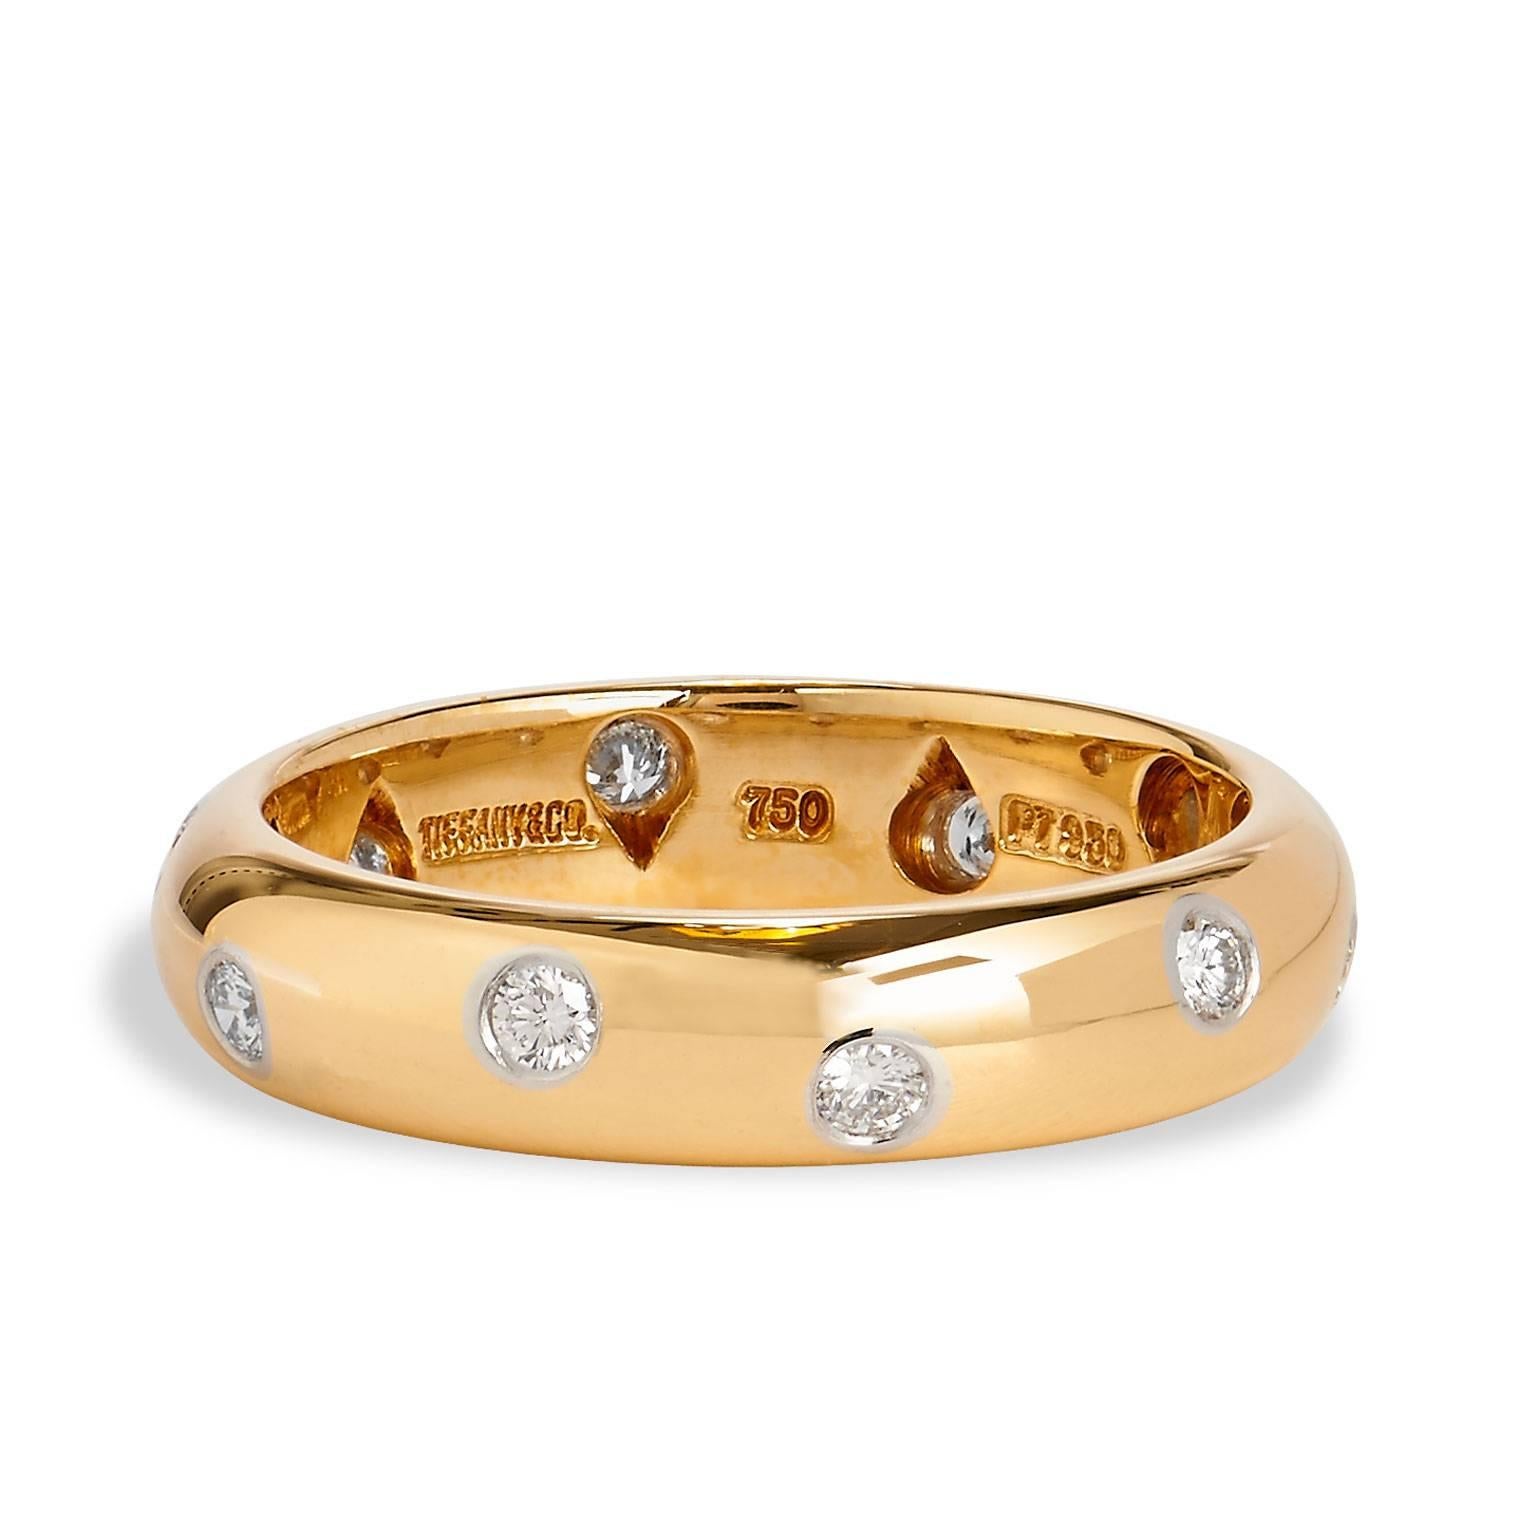 Show your love with this stunning authentic Etoile band ring from Tiffany & Co! This beautiful 18K Yellow Gold Ring has ten brilliant white Diamonds weighing 0.22ct Color: F/G Clarity: VS1 set in Platinum heads. This Gorgeous ring is a 5.5 and is